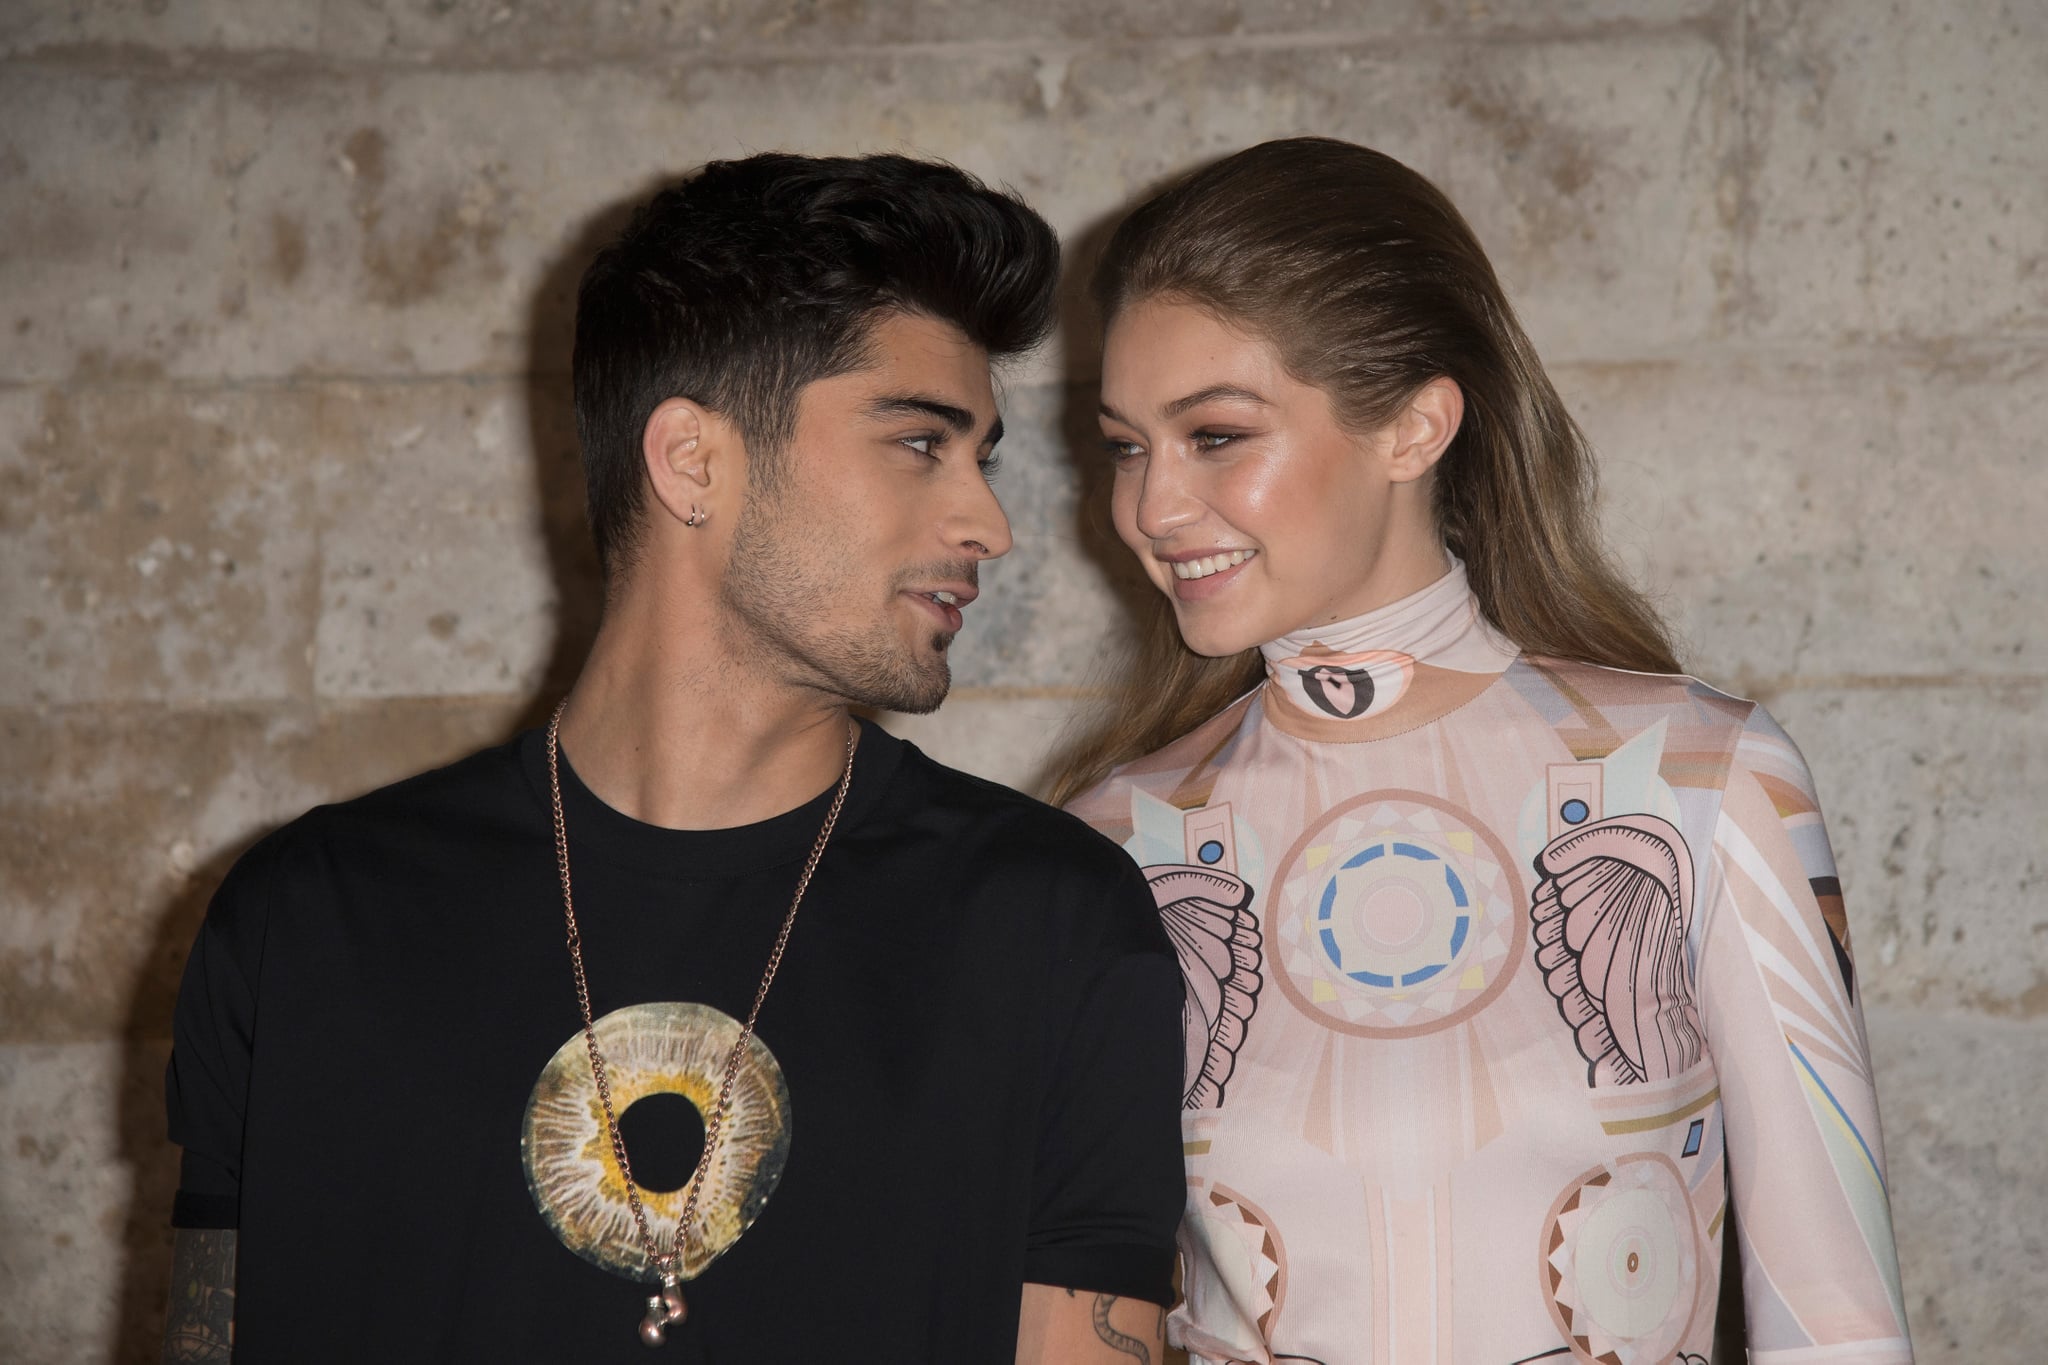 PARIS, FRANCE - OCTOBER 02:  Zayn Malik and Gigi Hadid  attend the Givenchy show as part of the Paris Fashion Week Womenswear Spring/Summer 2017 on October 2, 2016 in Paris, France.  (Photo by Dominique Charriau/WireImage)